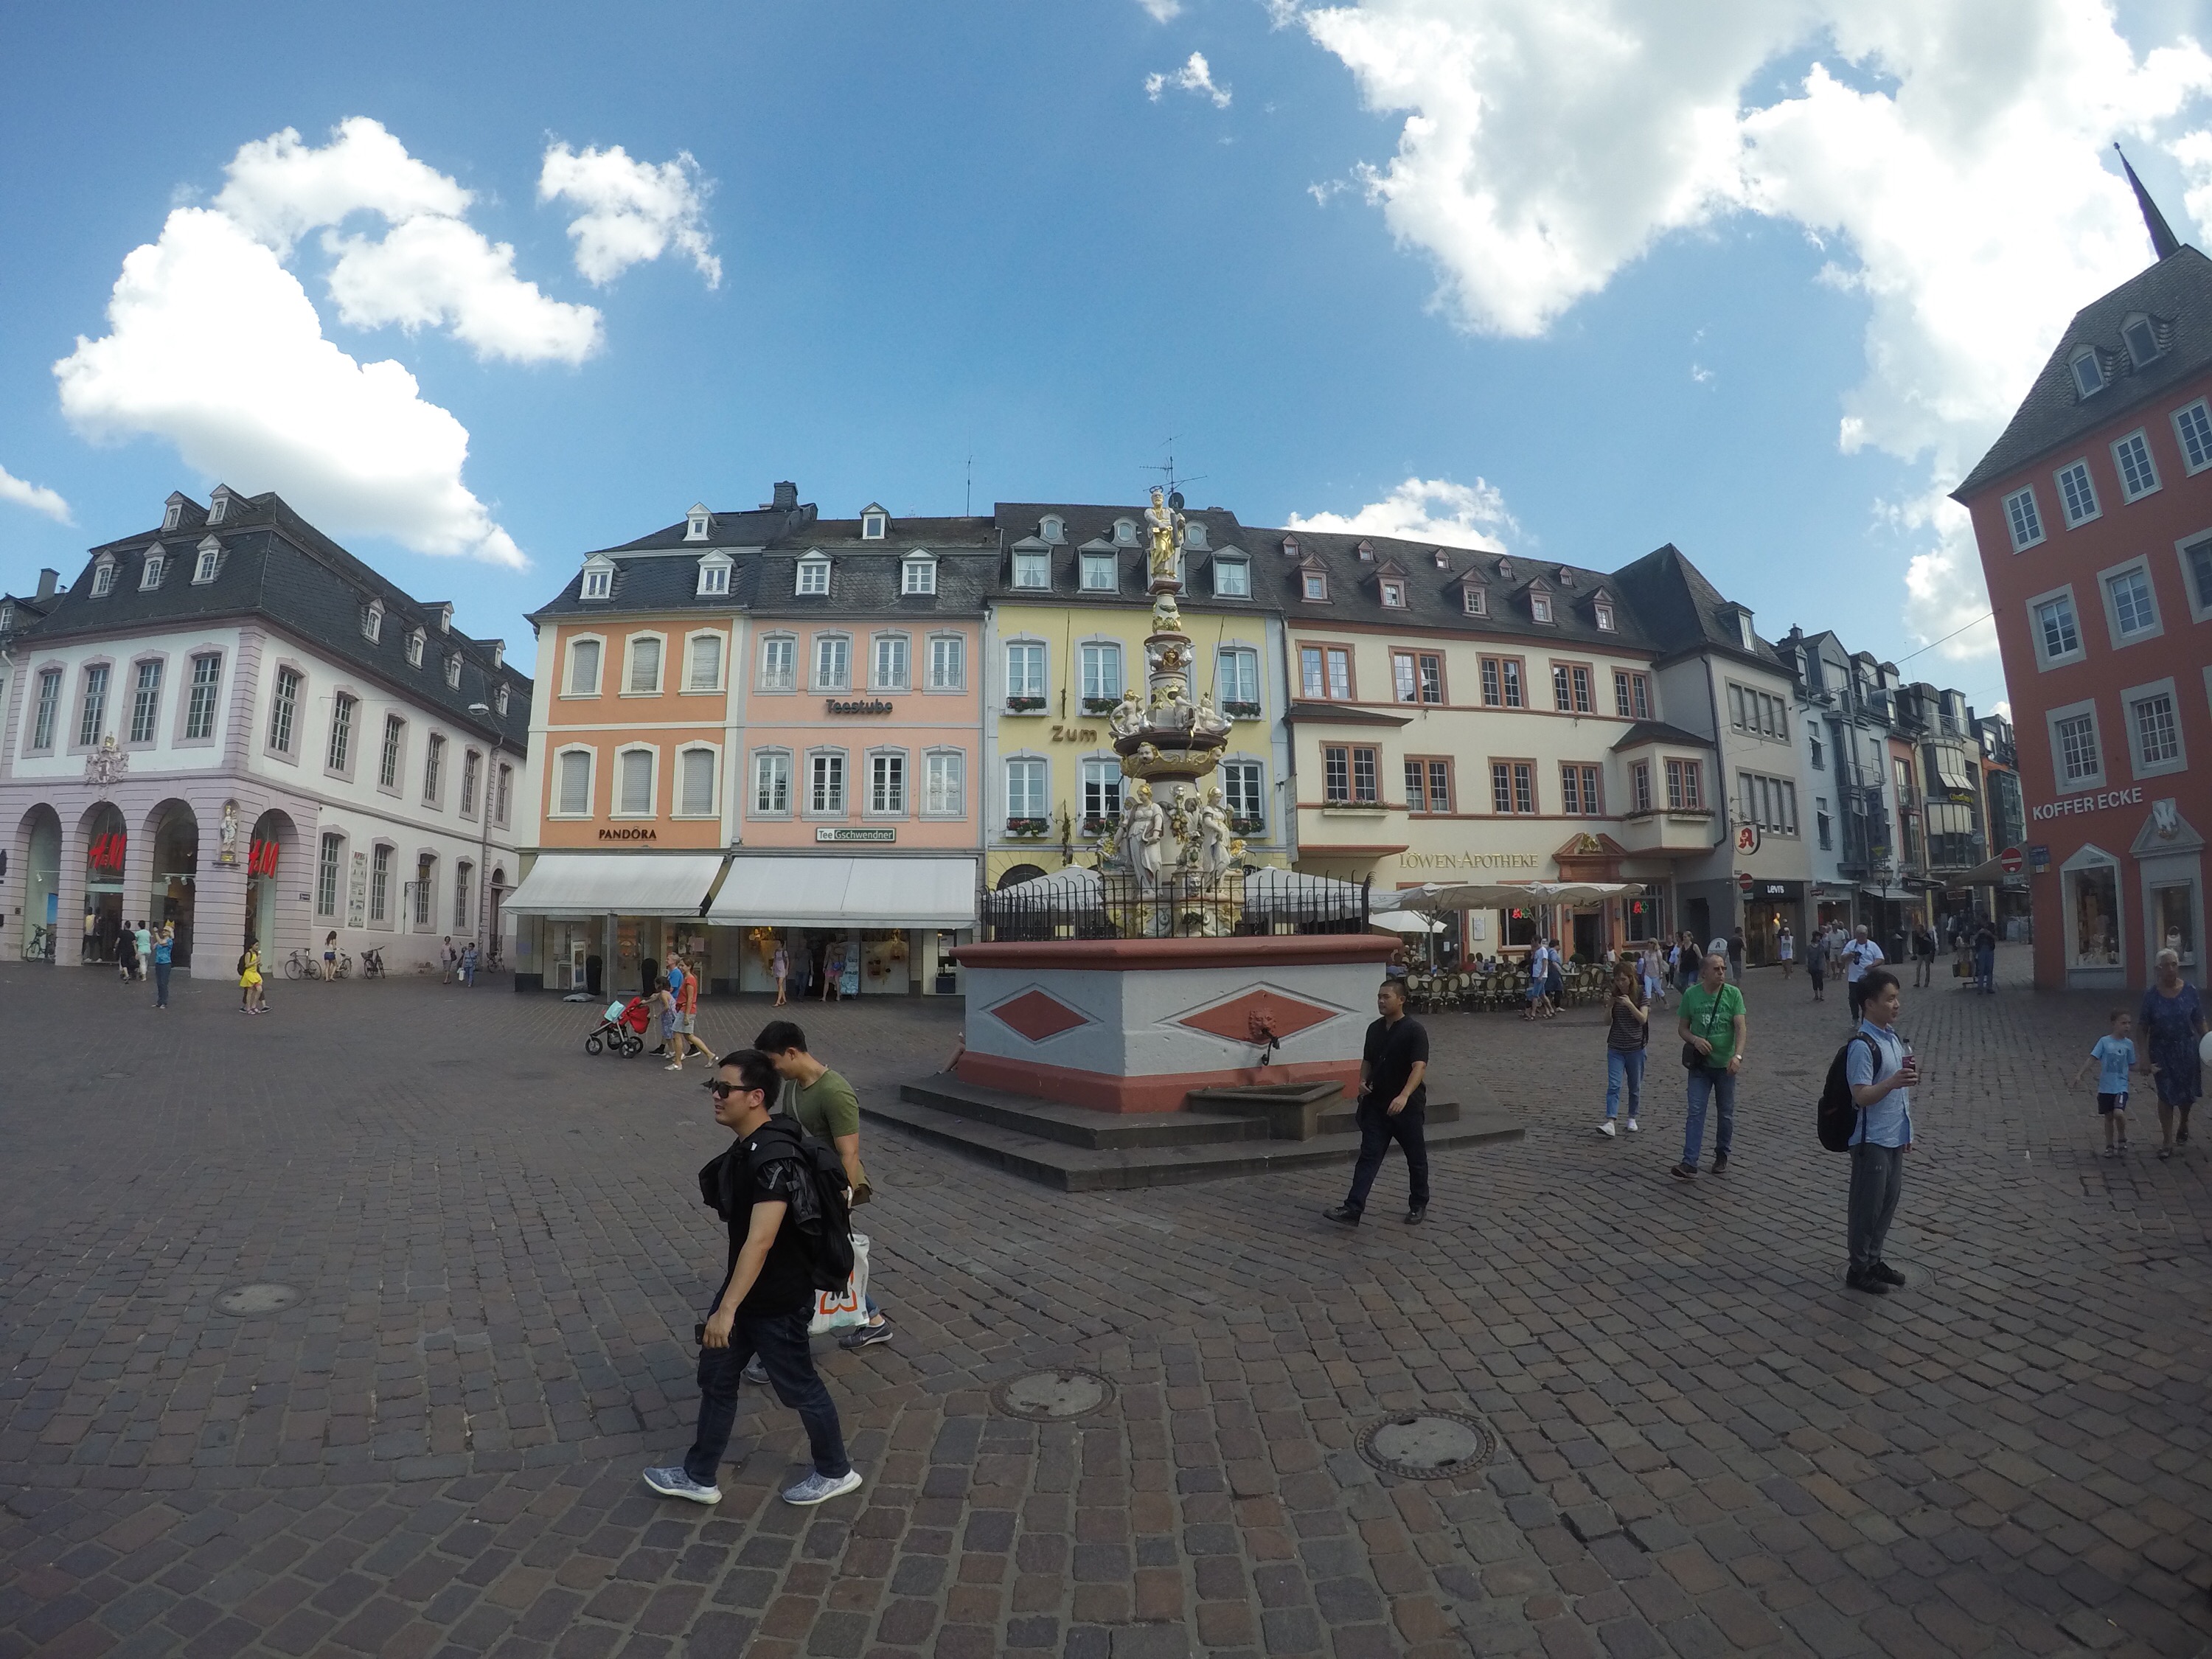 City square in Trier, Germany